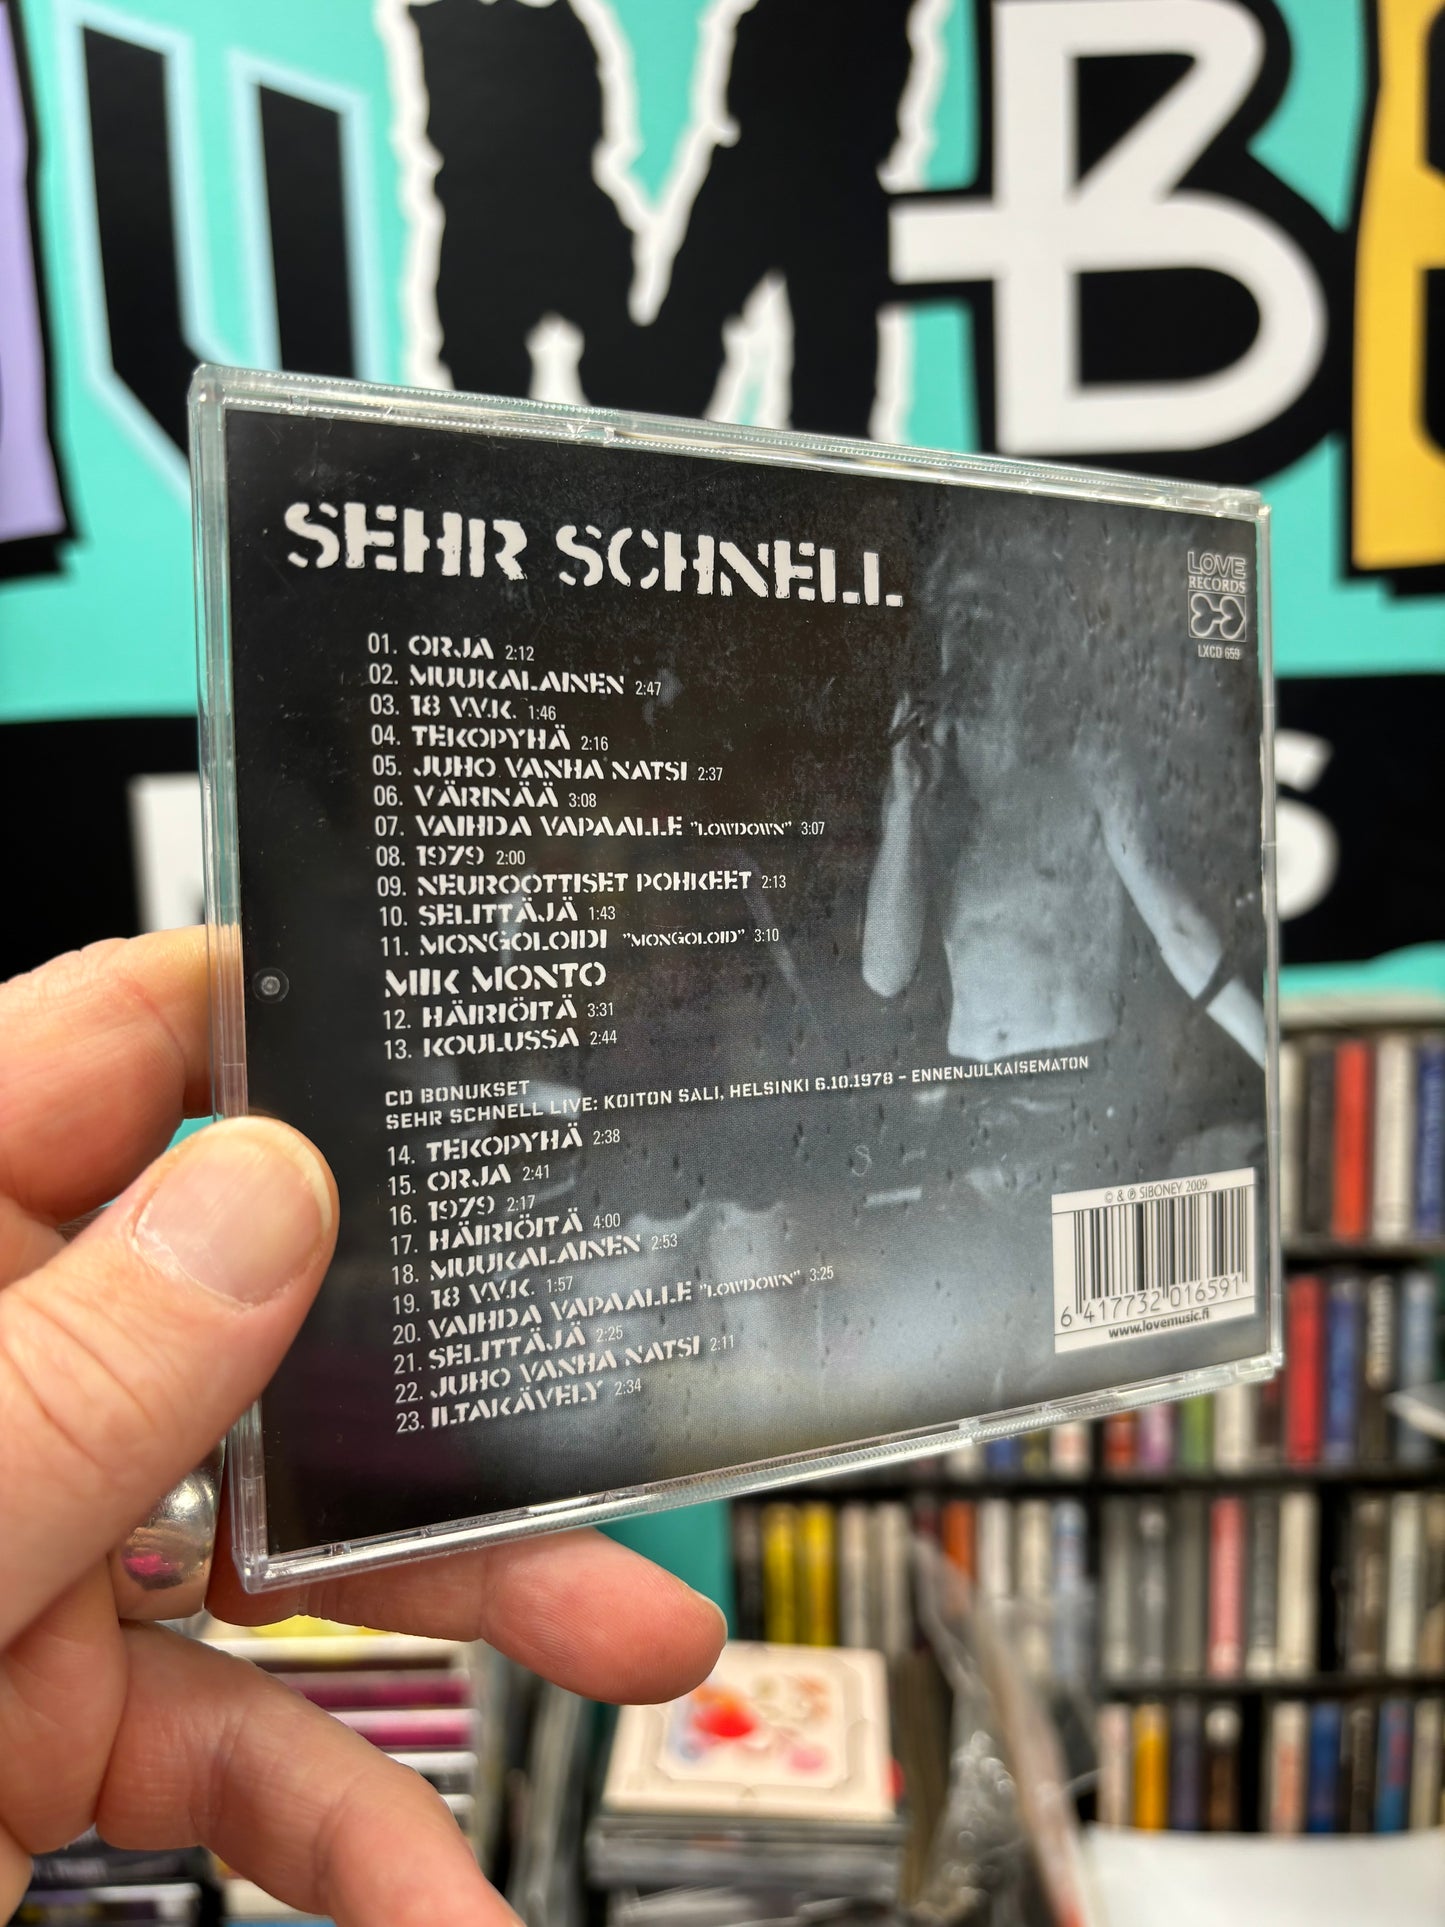 Sehr Schnell: Sehr Schnell, CD, remastered, Only pressing, Love Records, Finland 2009